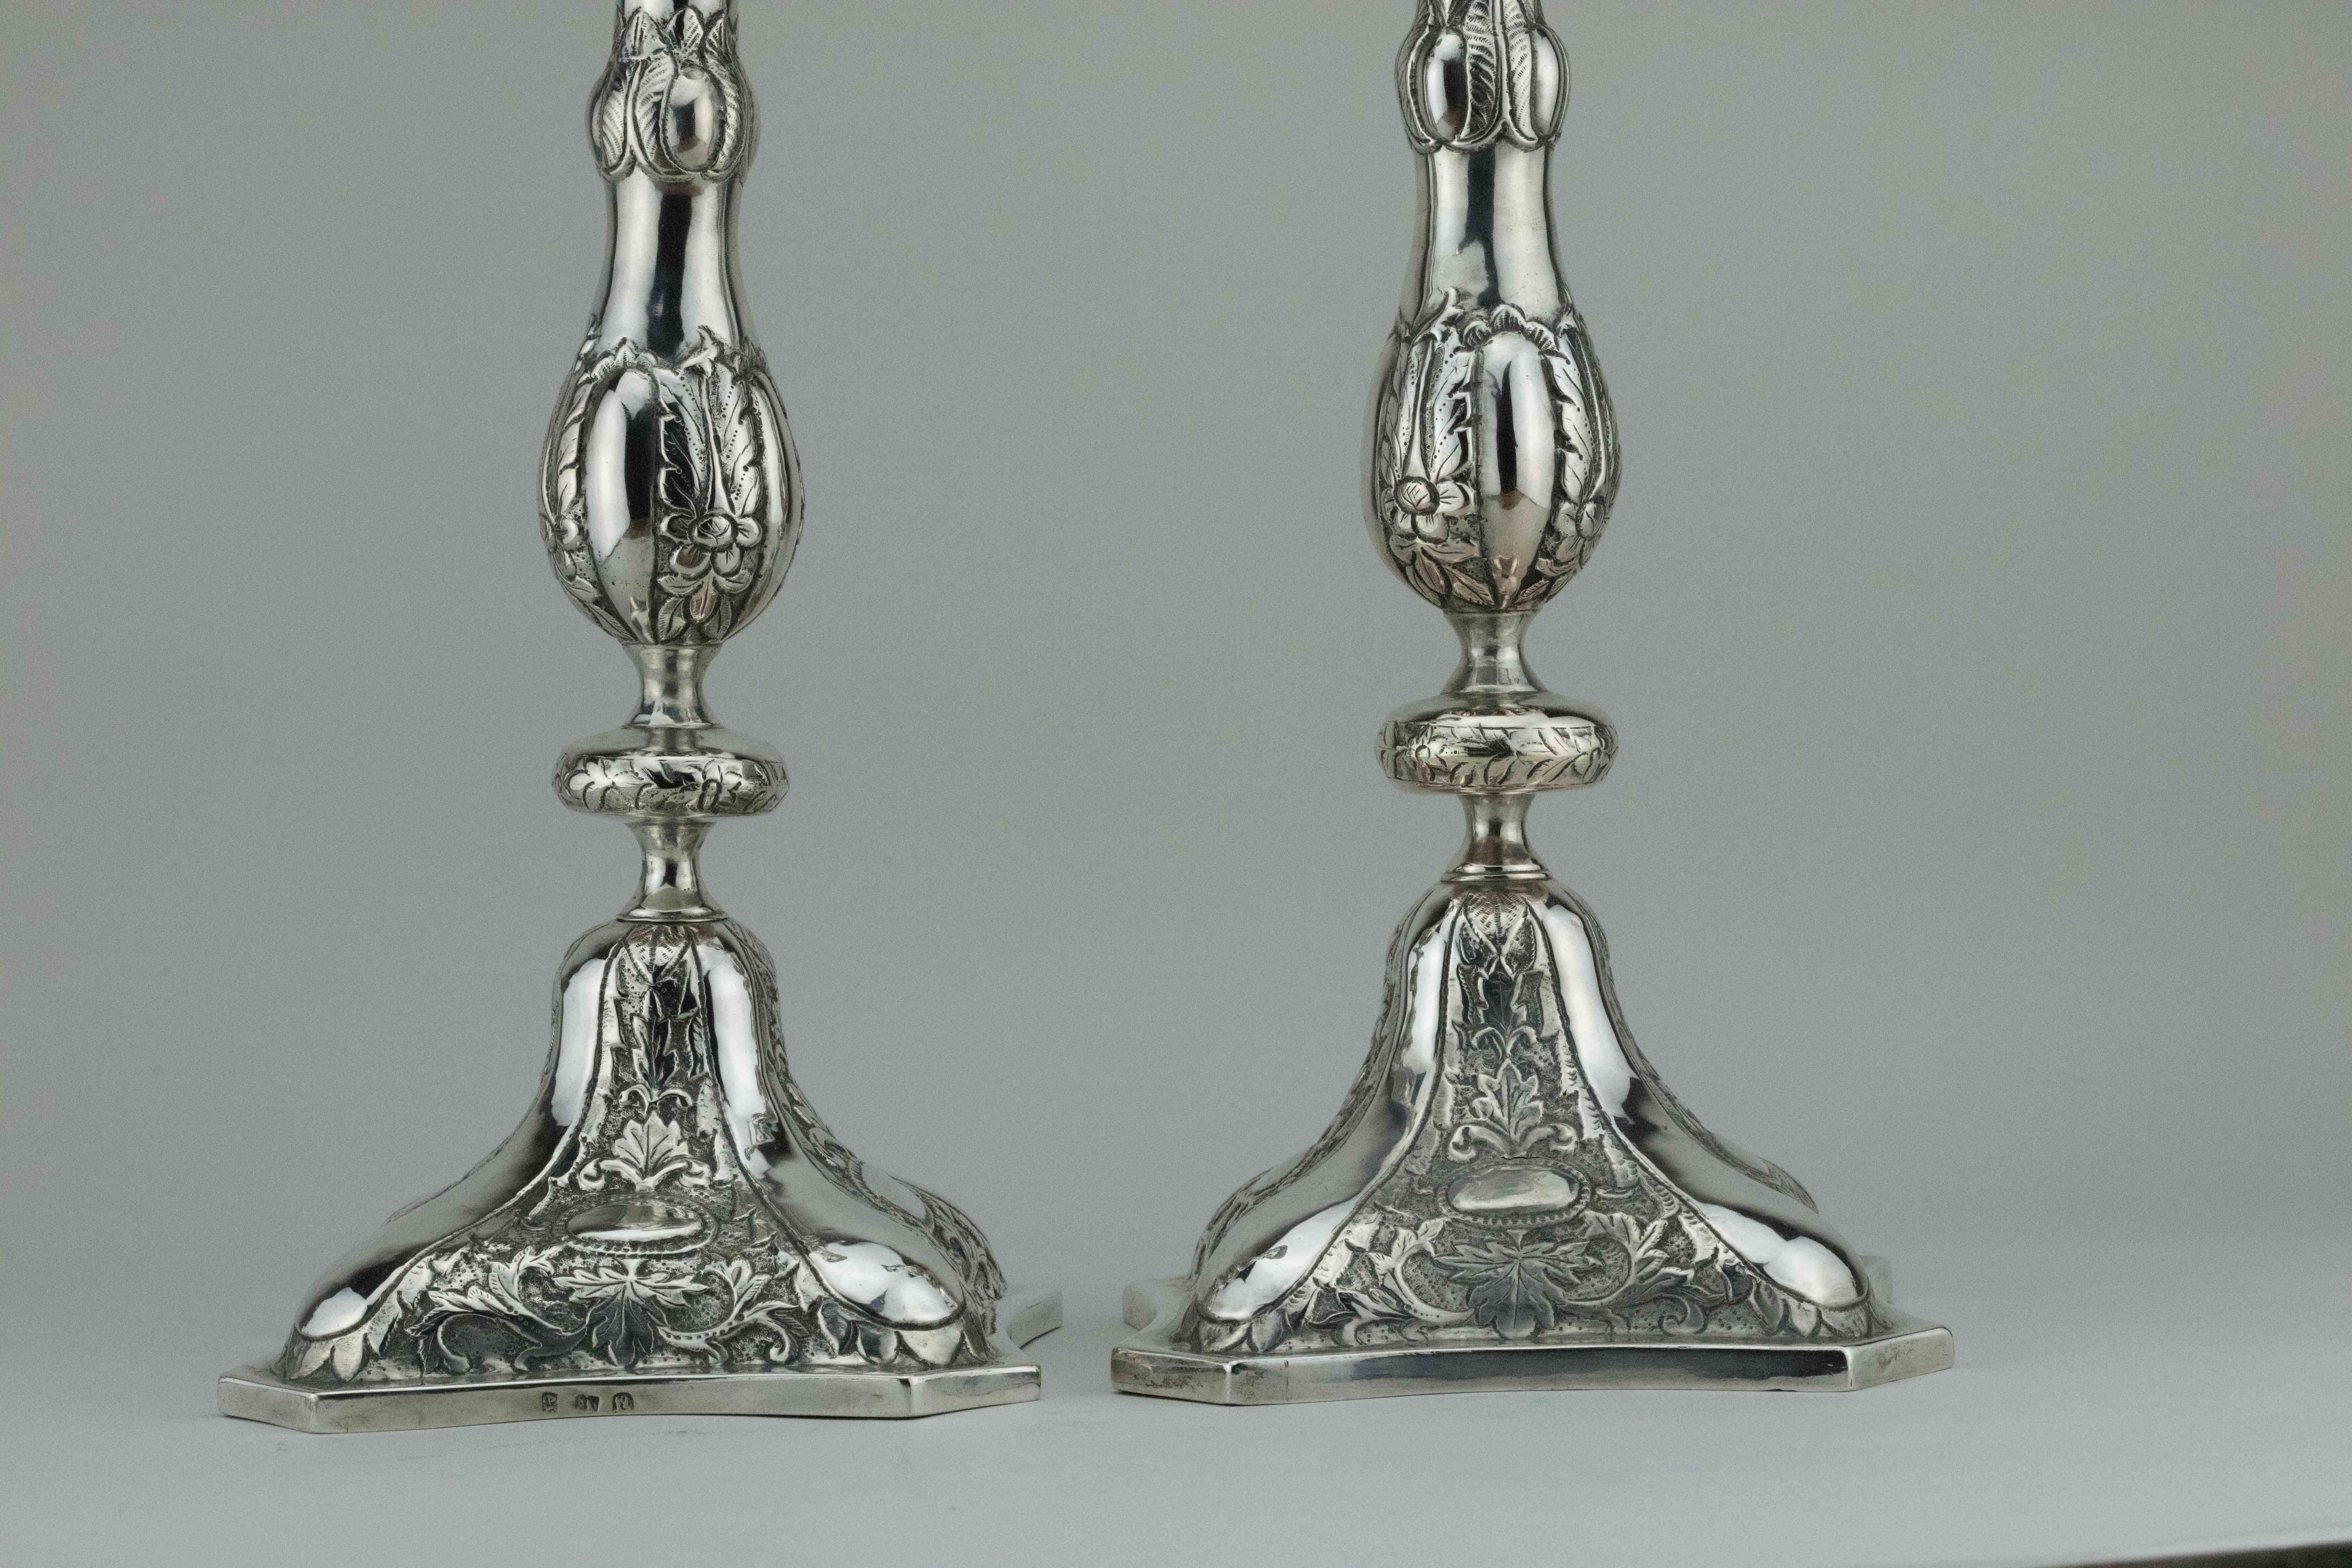 Large silver Shabbat candlesticks, Poland, circa 1880.
Beautifully chased and engraved with flowers and leaves design. 
Set on a chased stylized square base.
Marked on the base with 